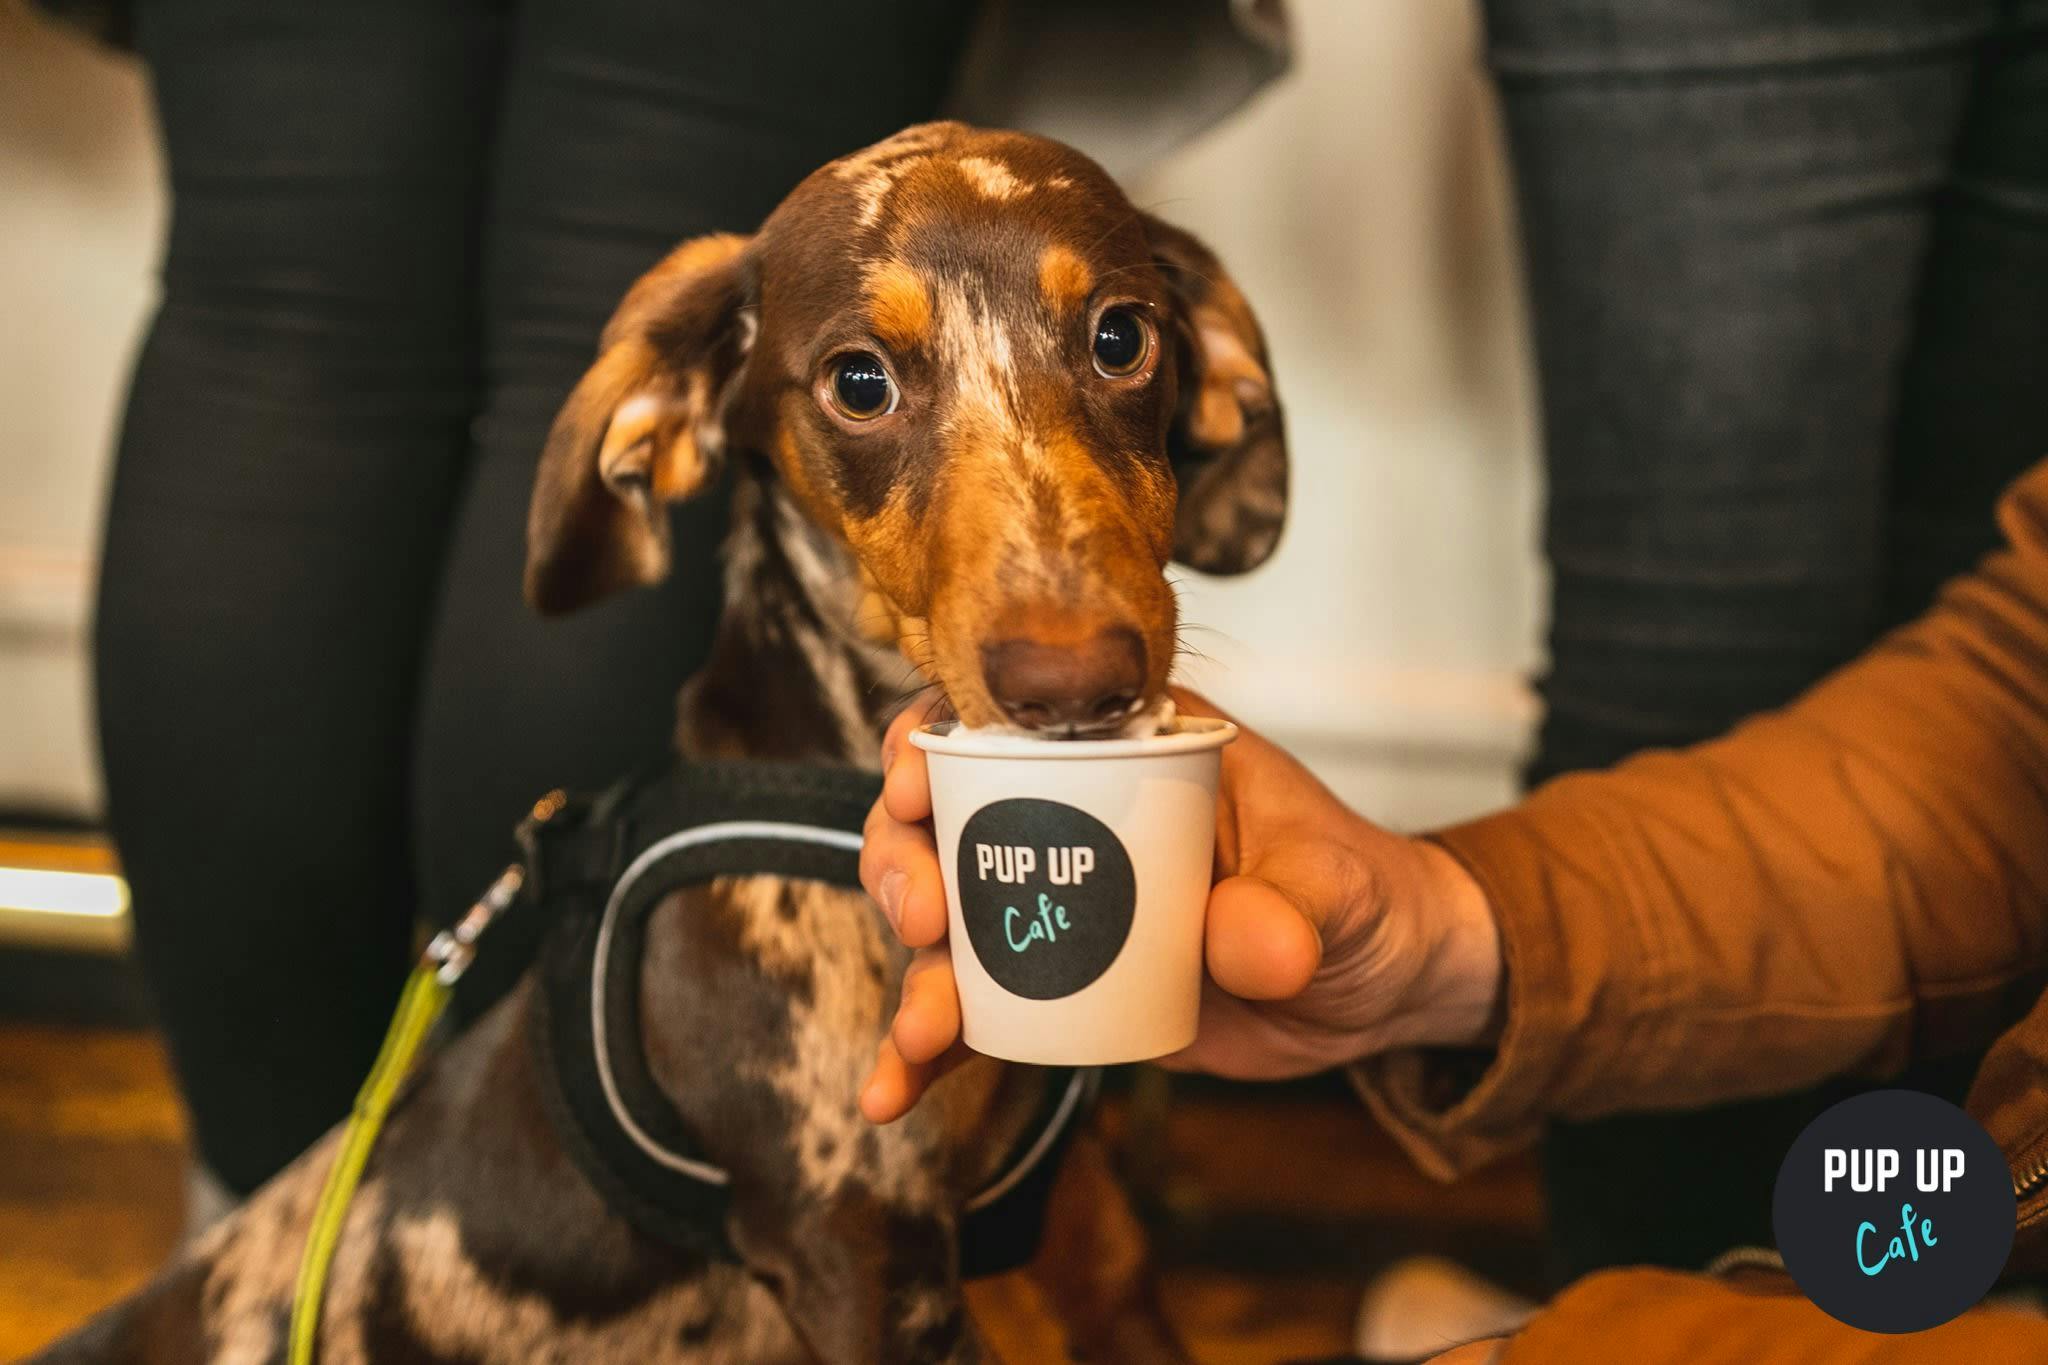 A sausage dog cafe could be coming to a place near you!